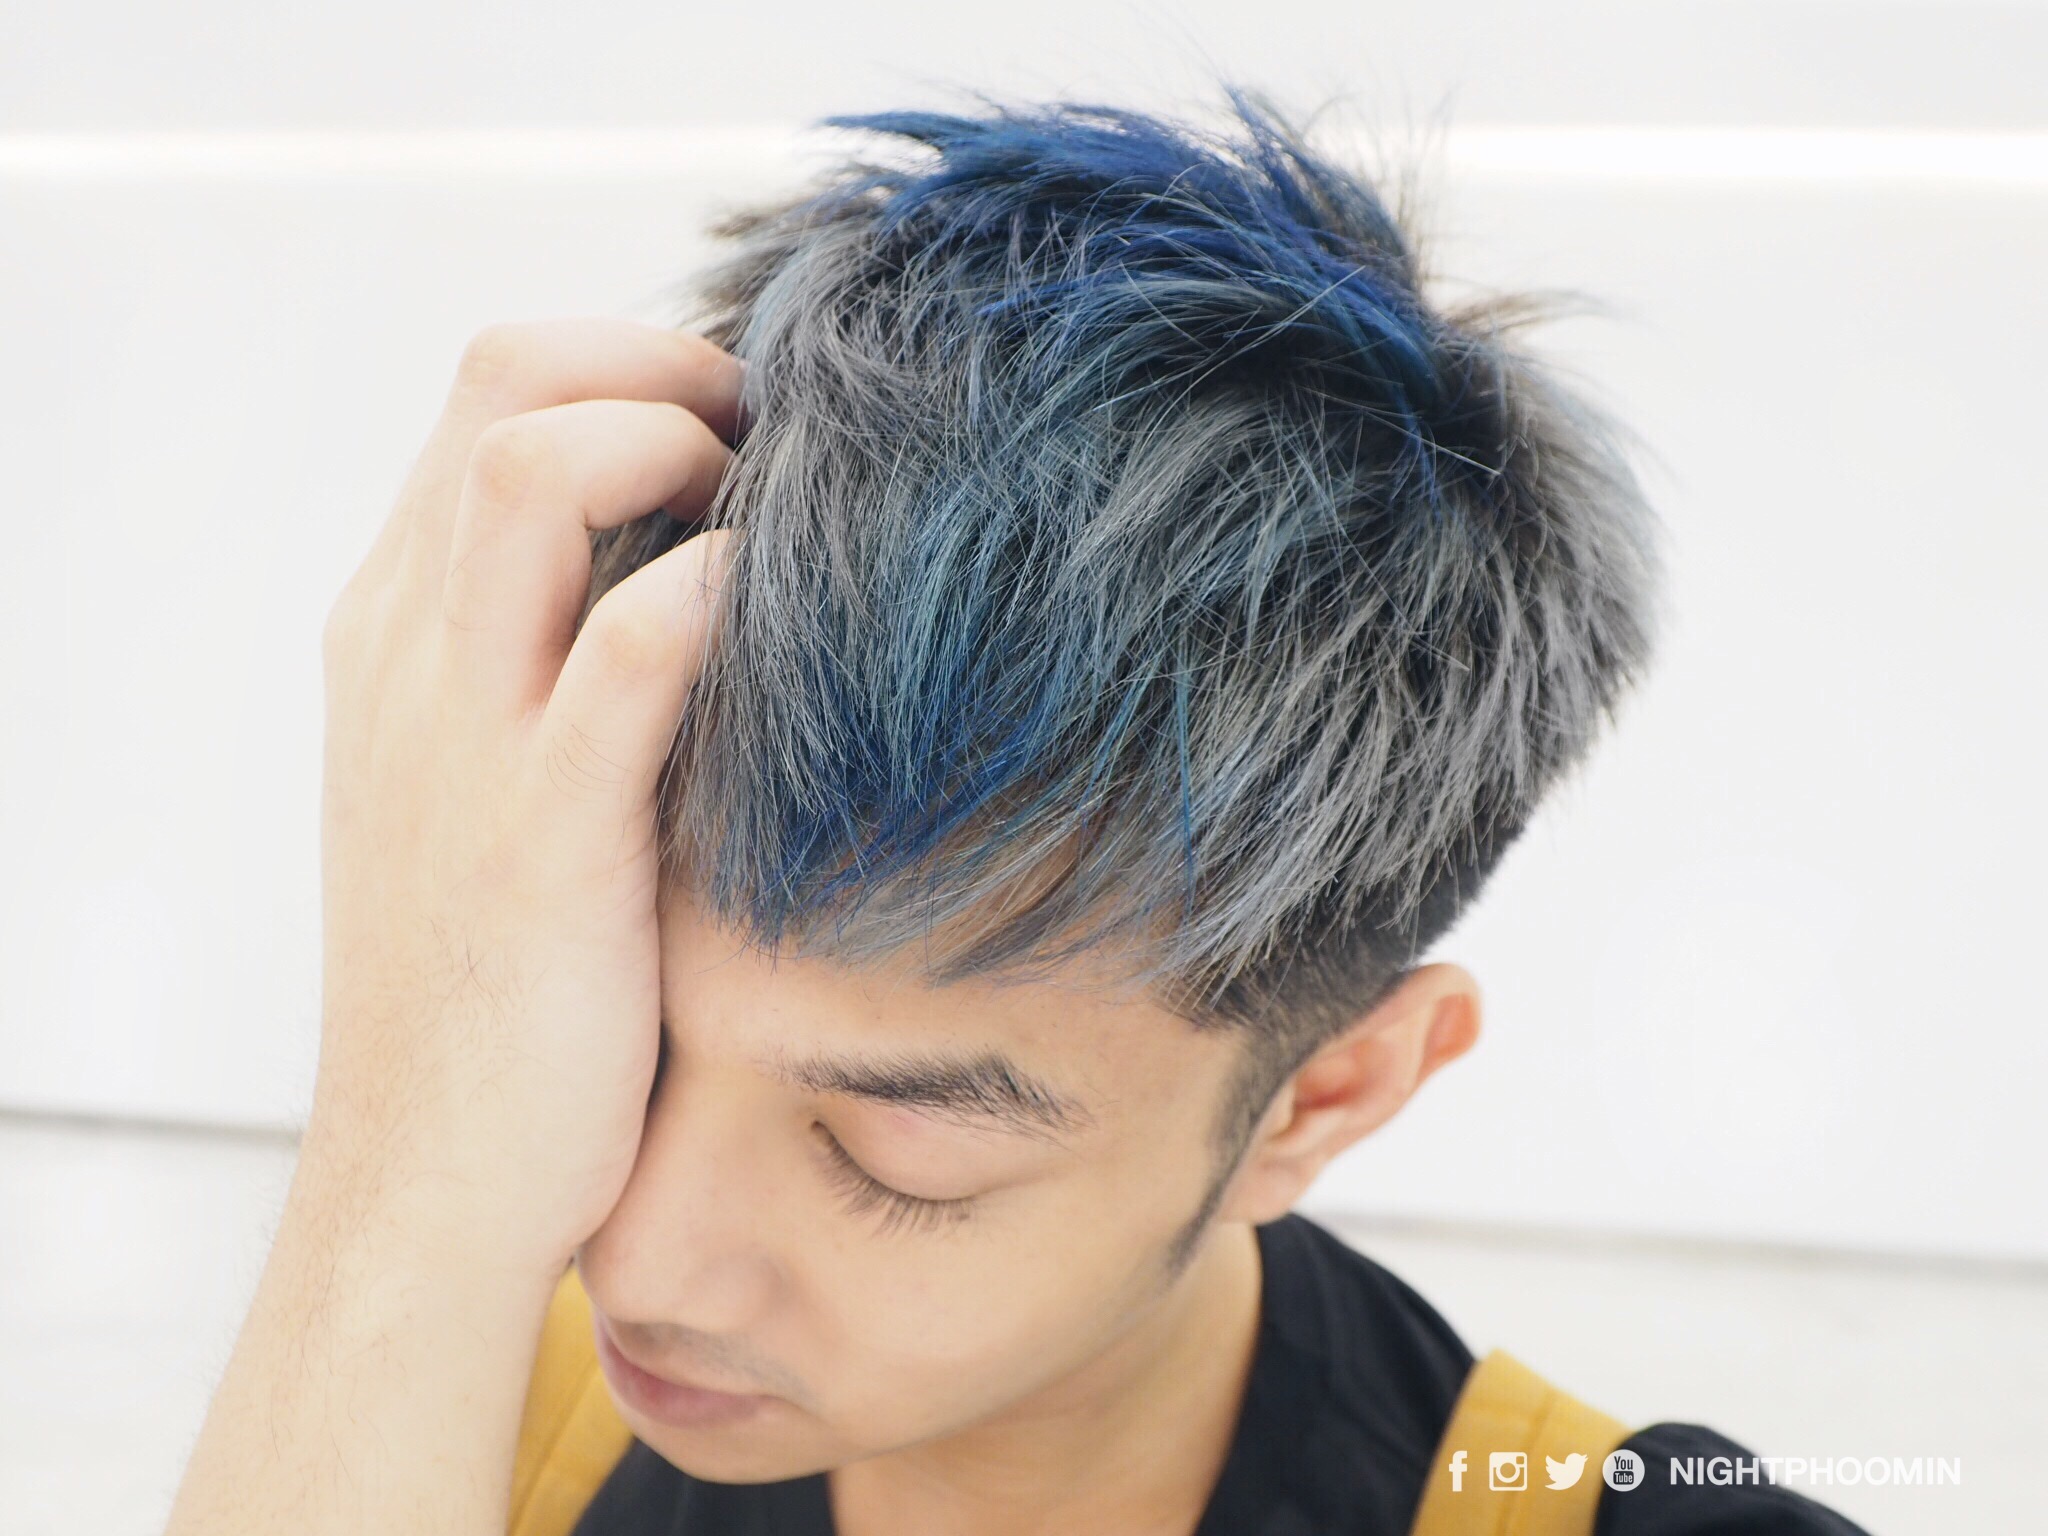 1. "How to Achieve Silver Hair with Blue Tips" - wide 10